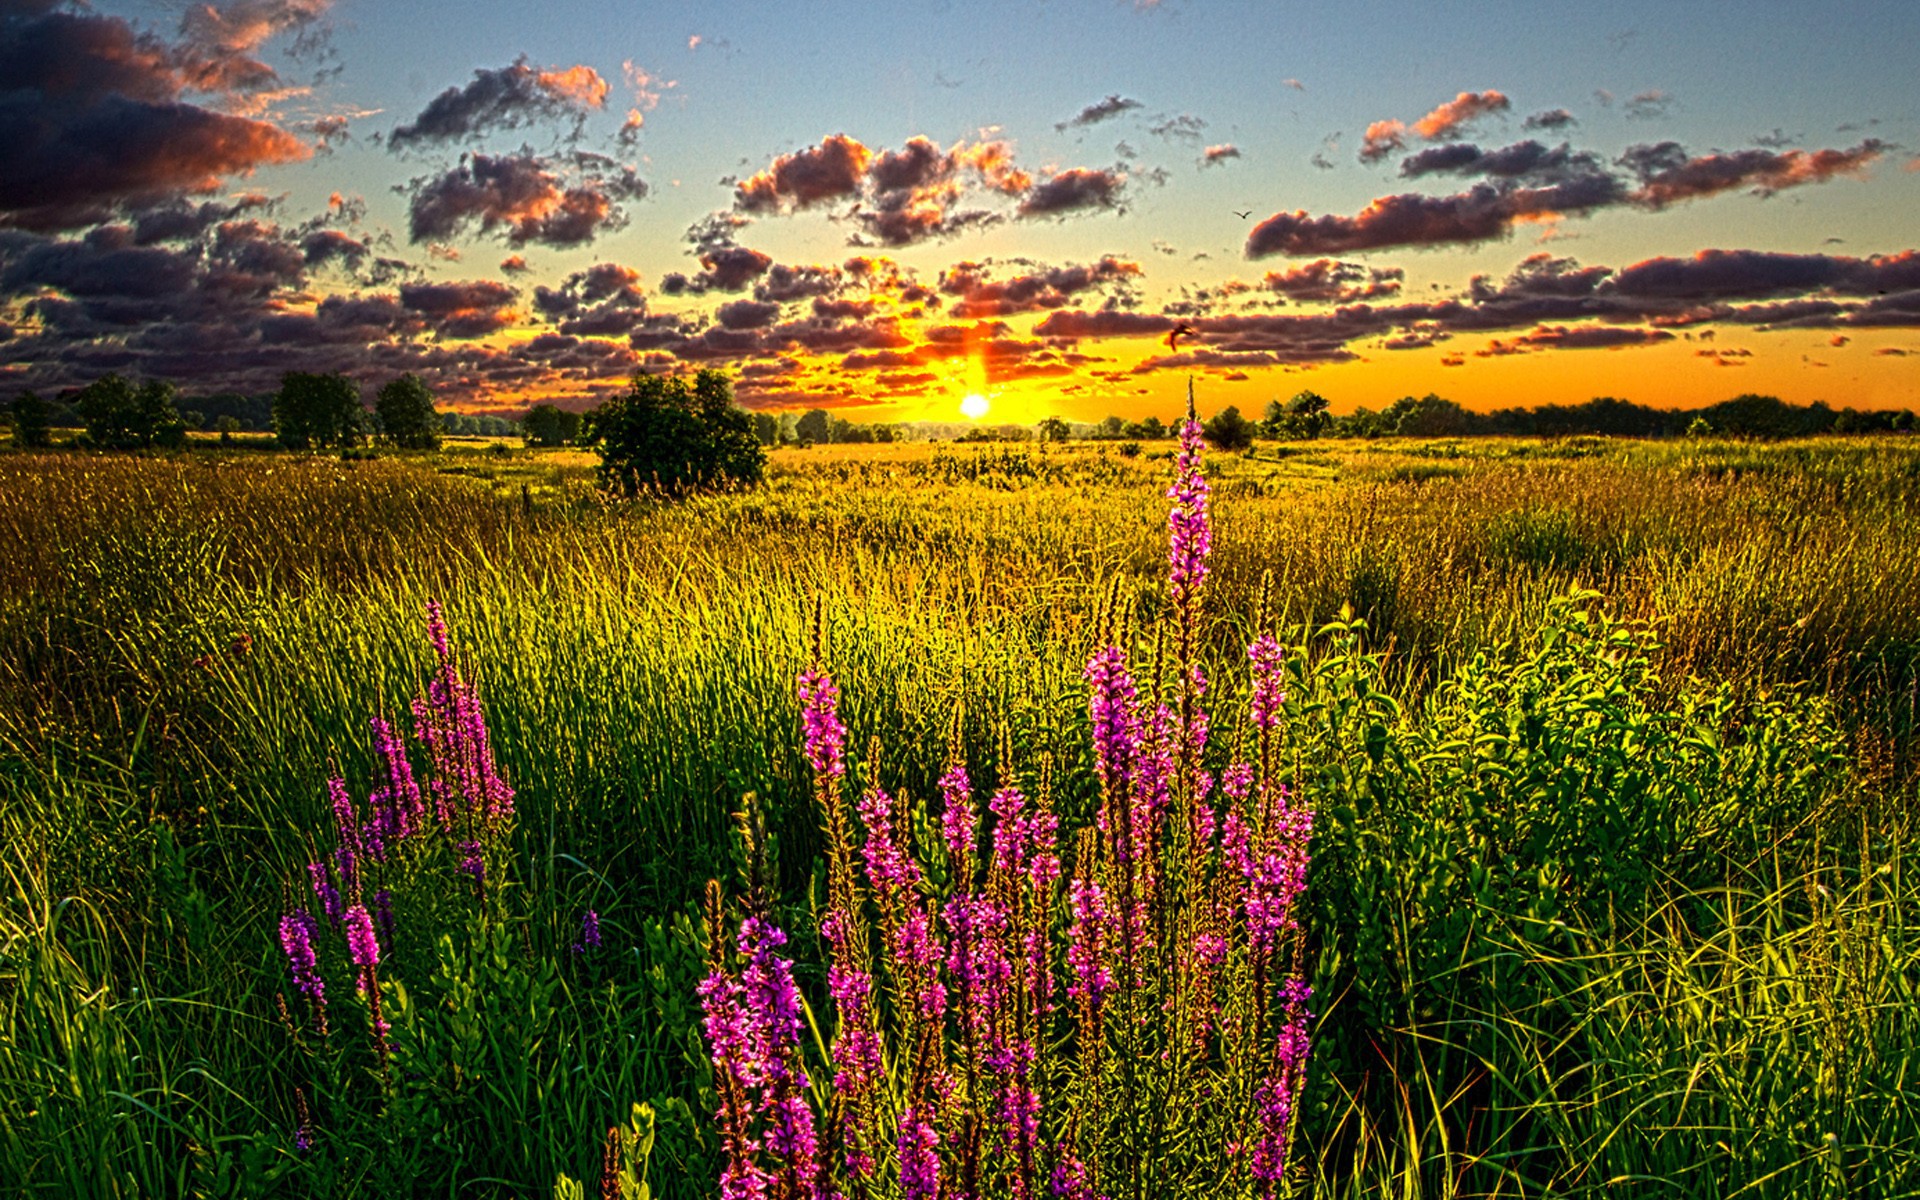 Summer sunset over the field wallpapers and images - wallpapers